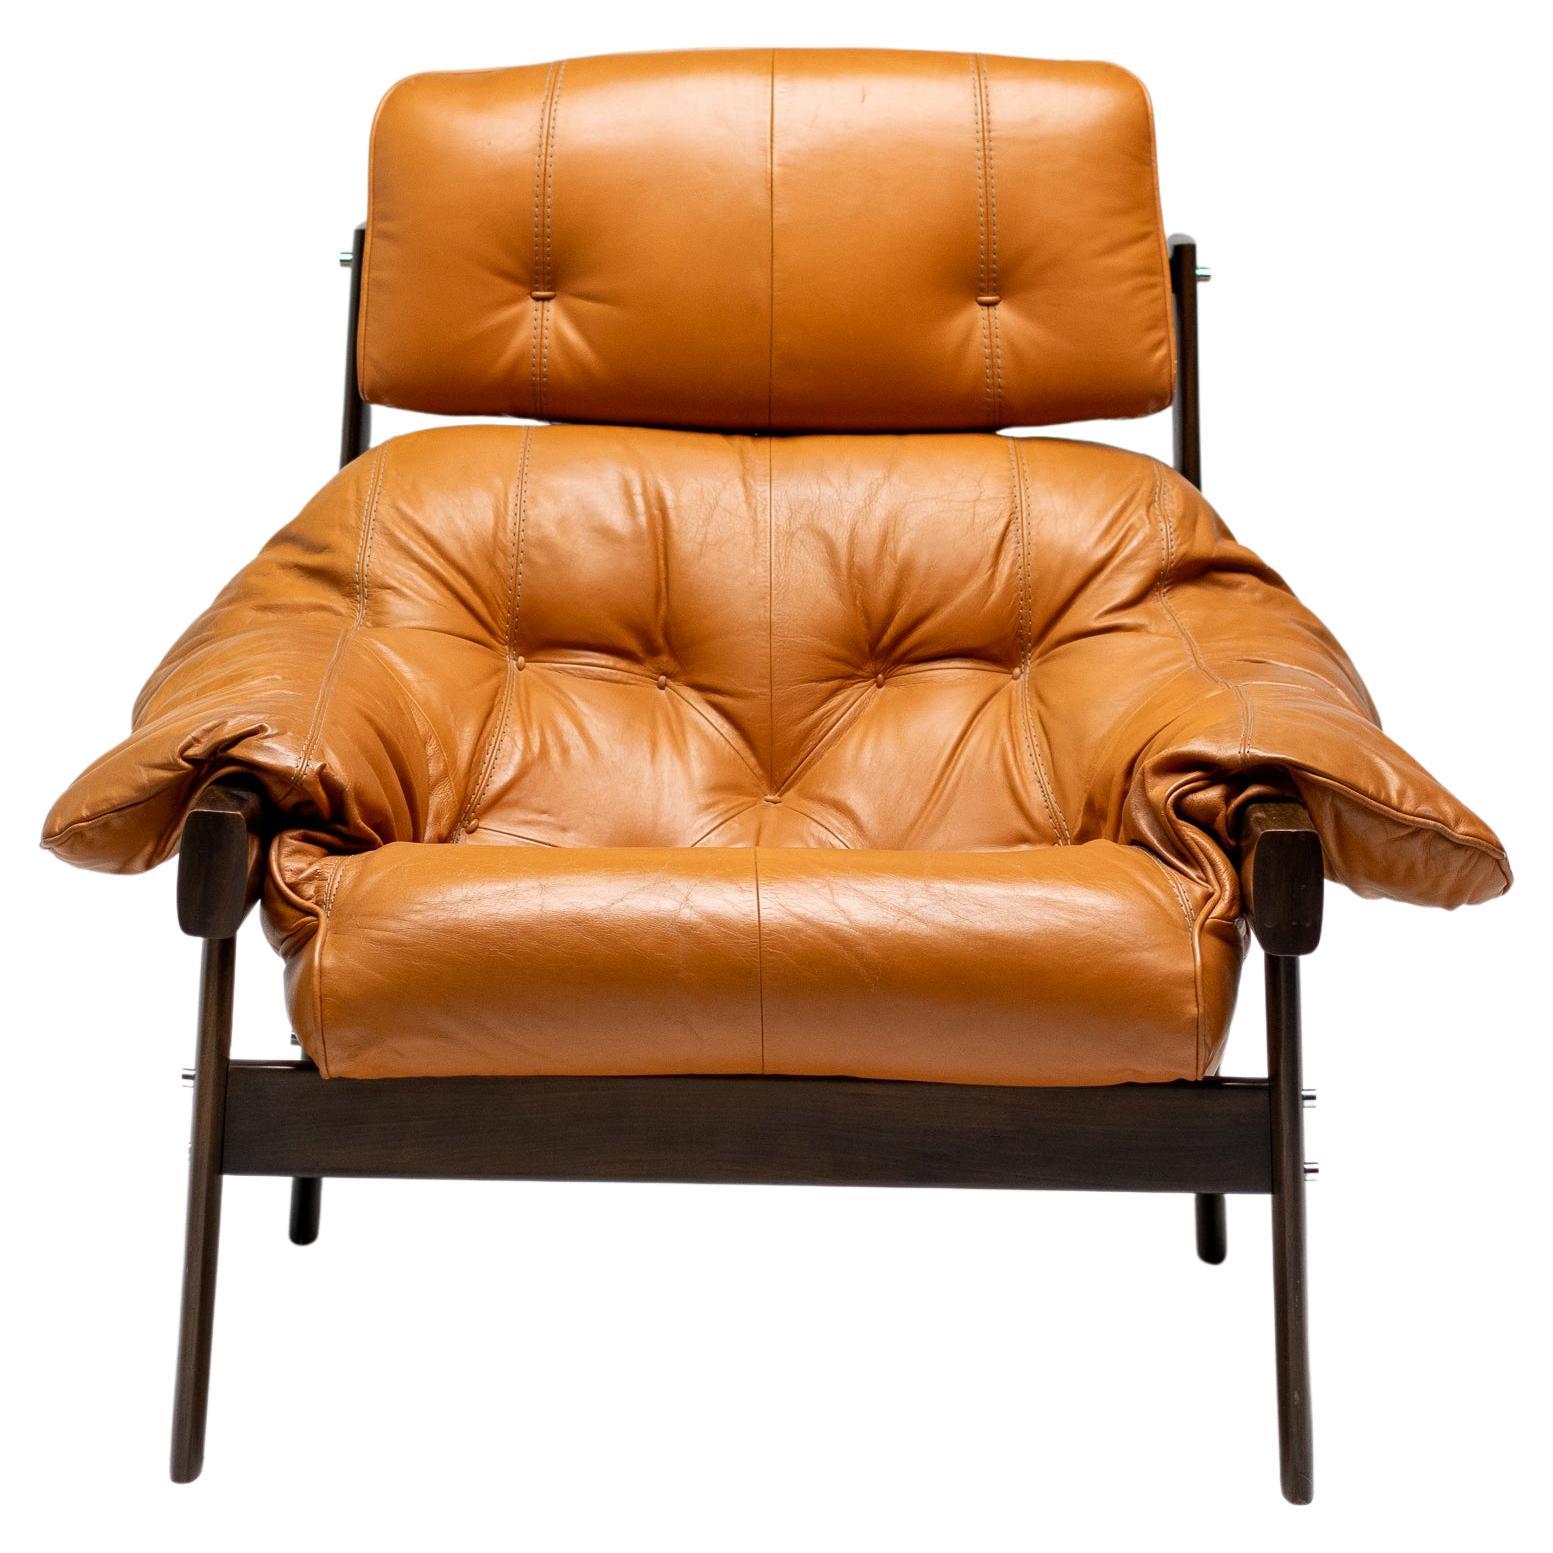 Percival Lafer MP-43 Lounge Chair Produced by Lafer MP in Brazil